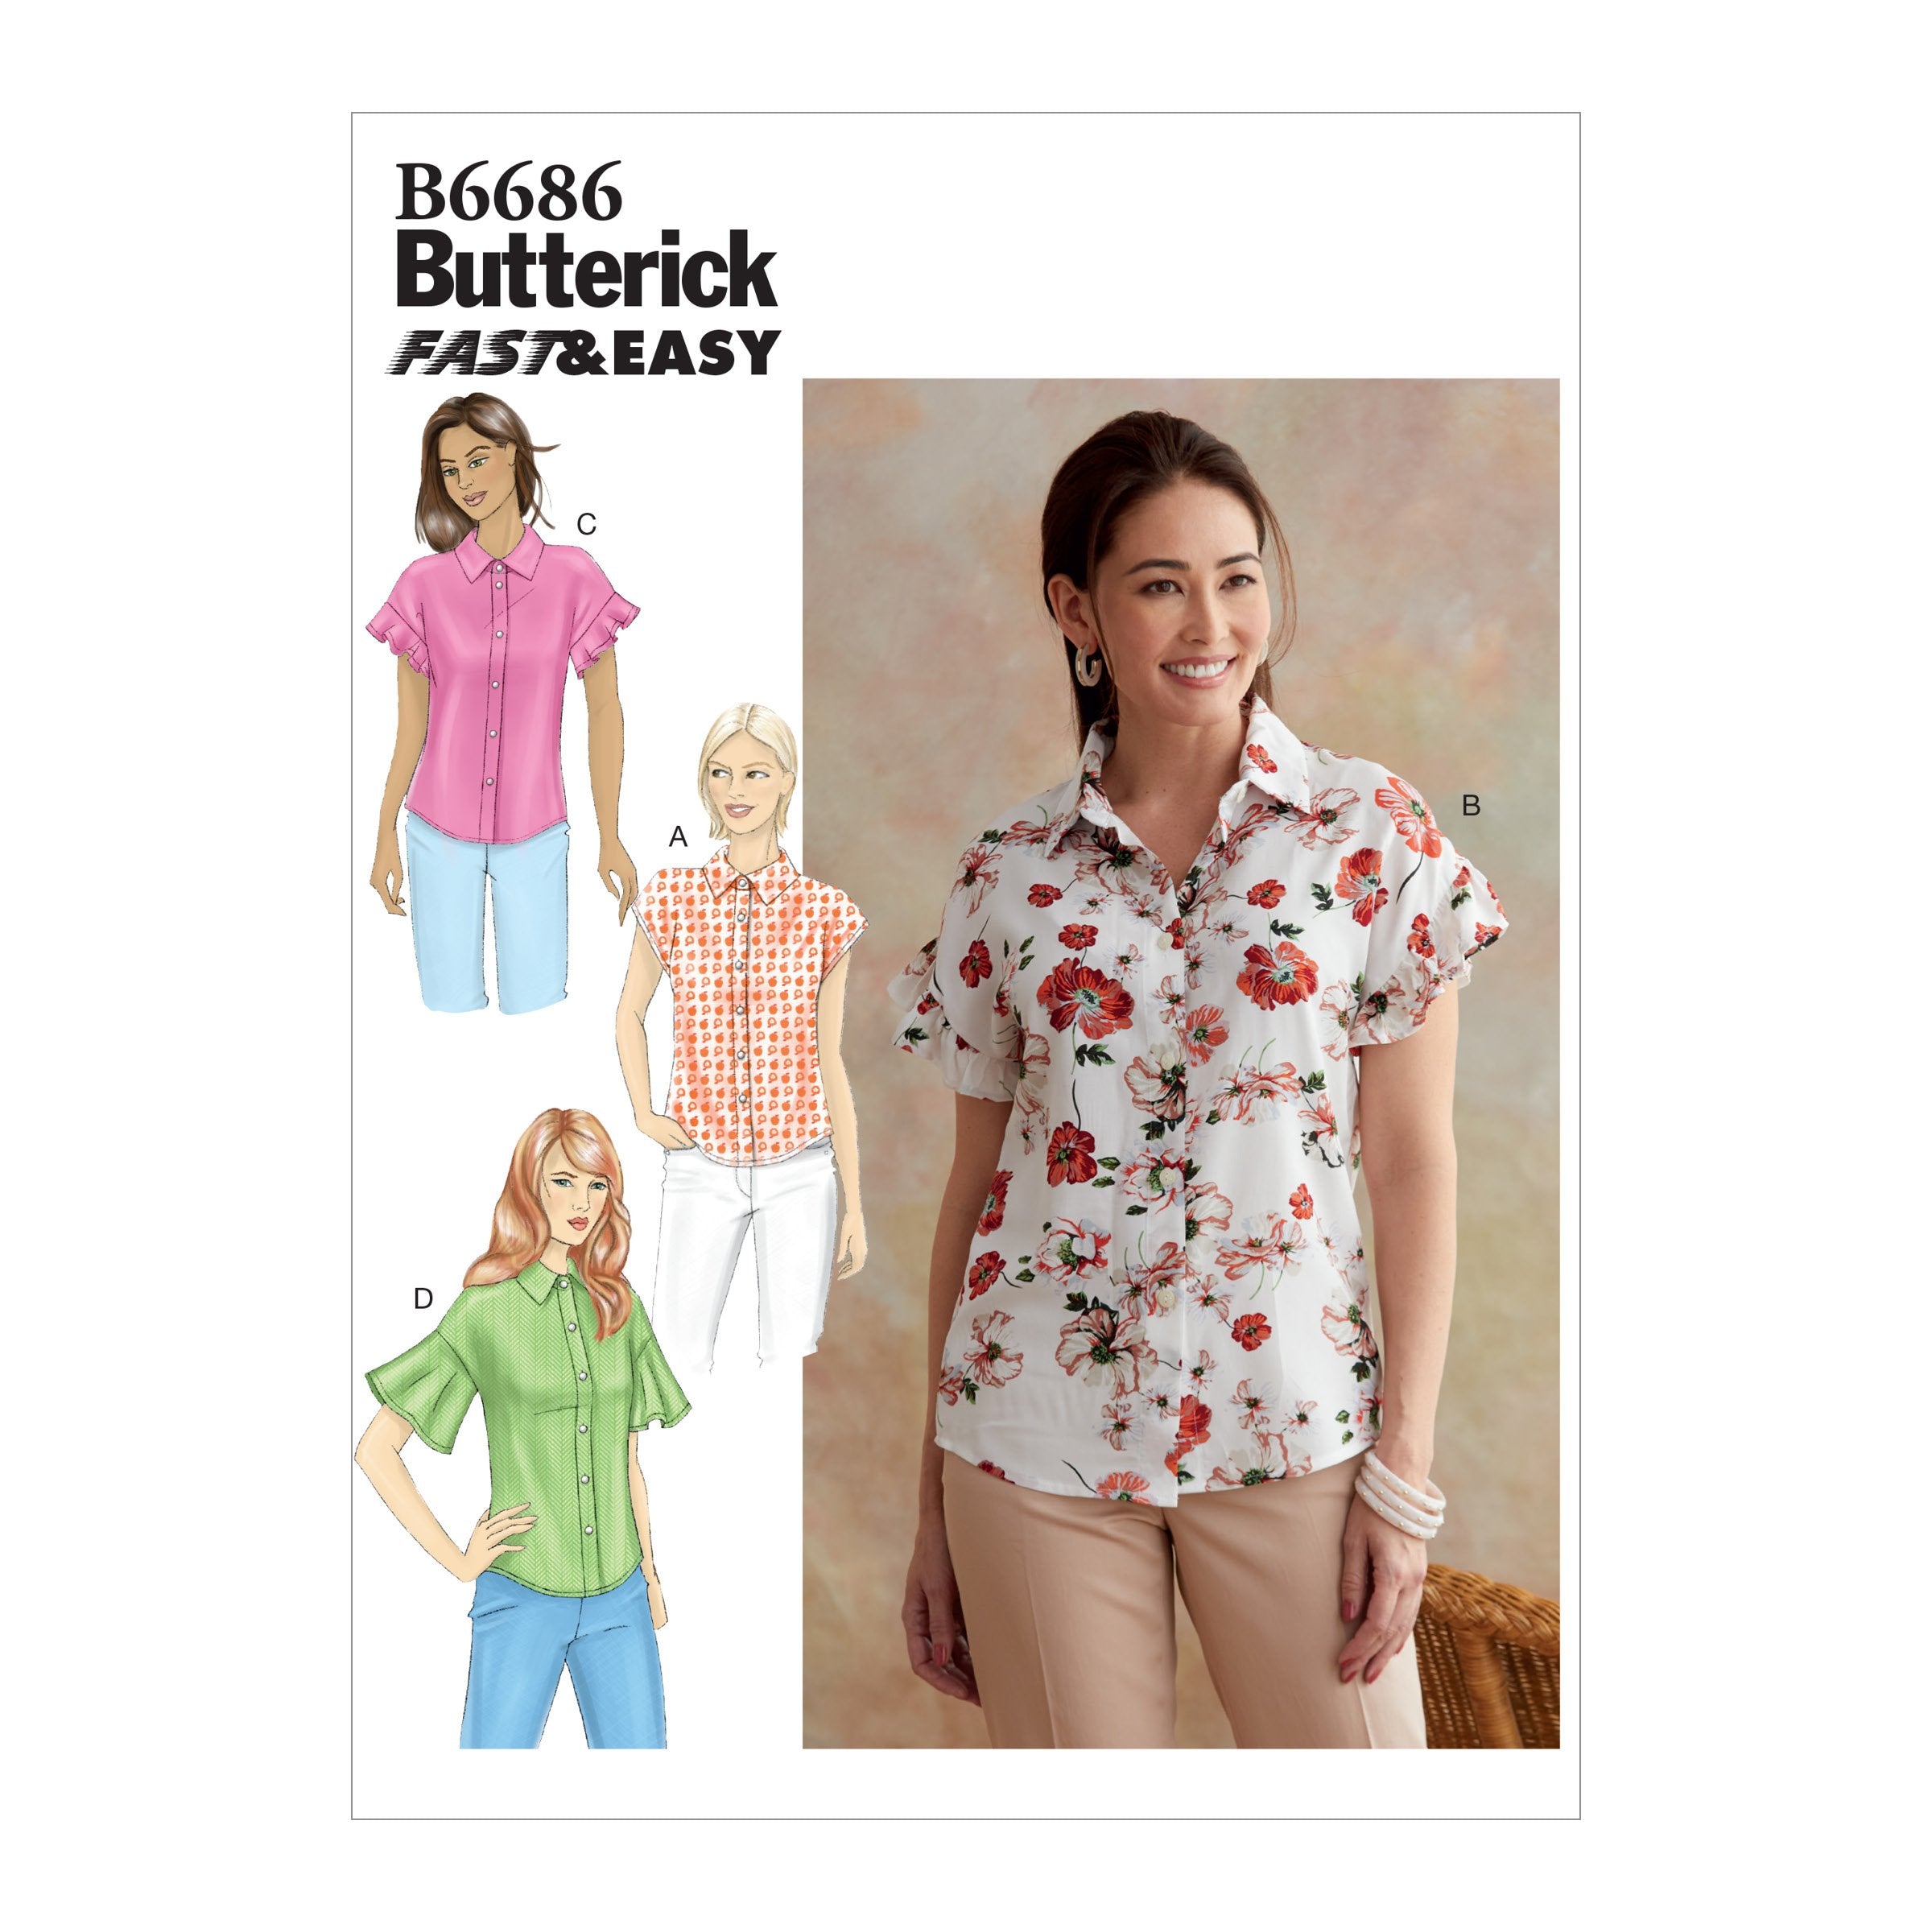 Butterick B6686 Misses' Top | Very Easy from Jaycotts Sewing Supplies